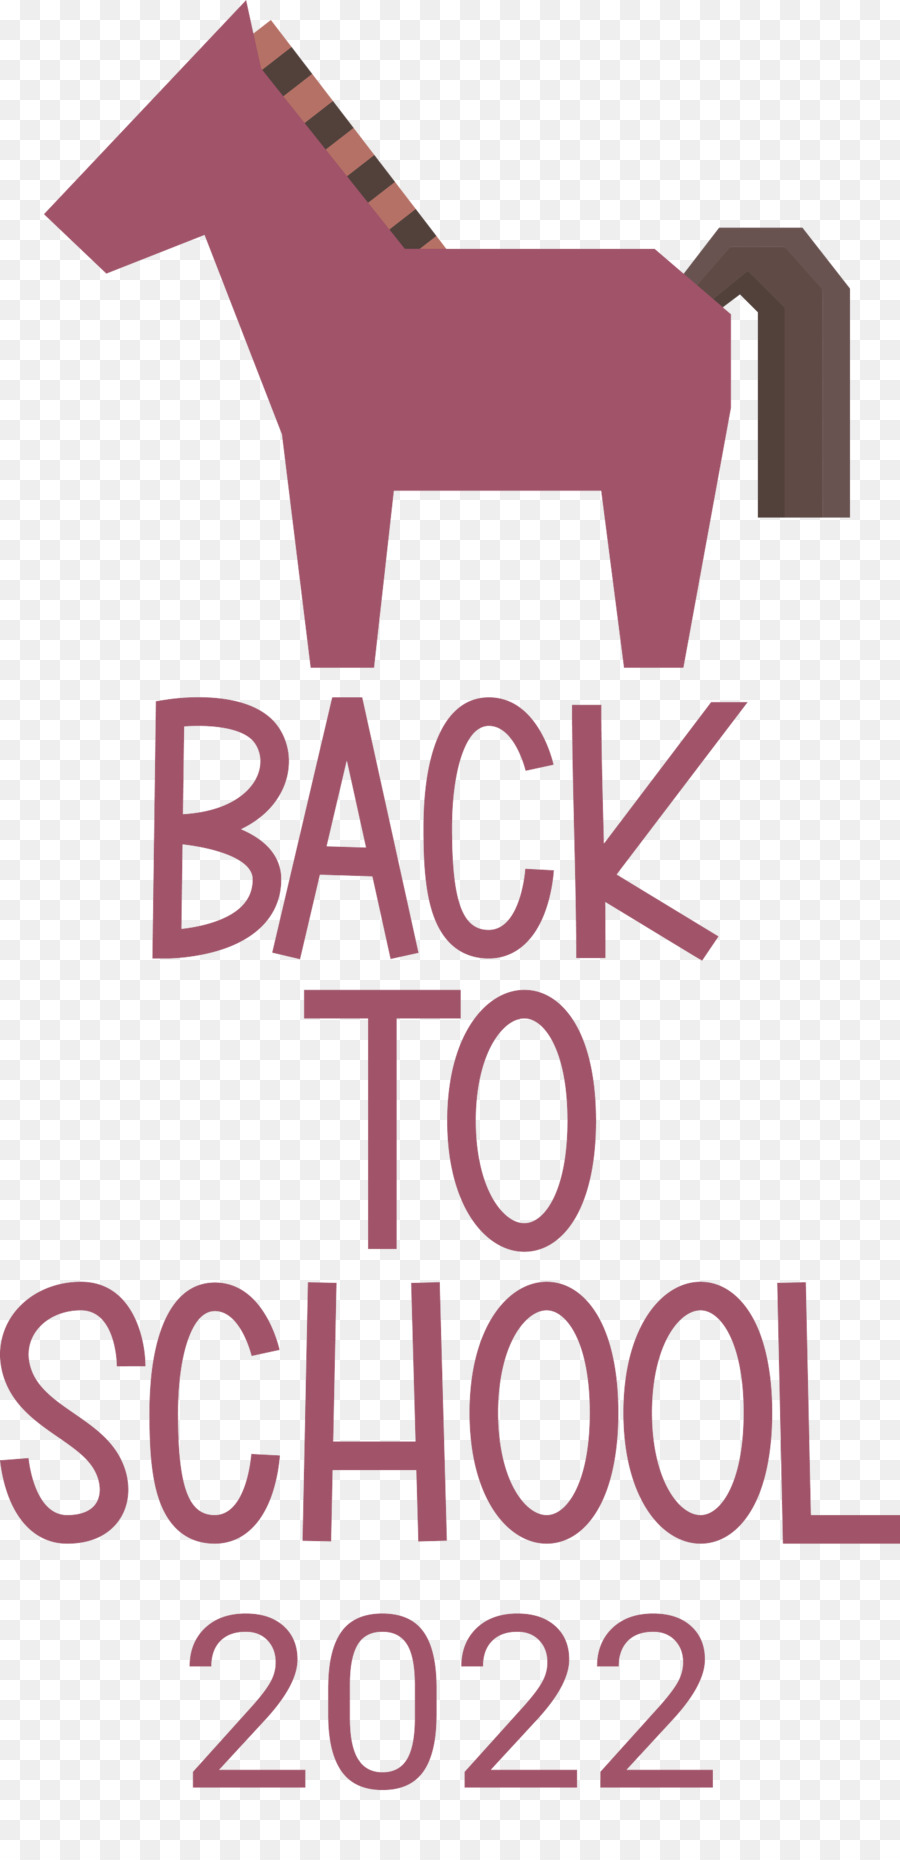 Back to school Back to school 2022